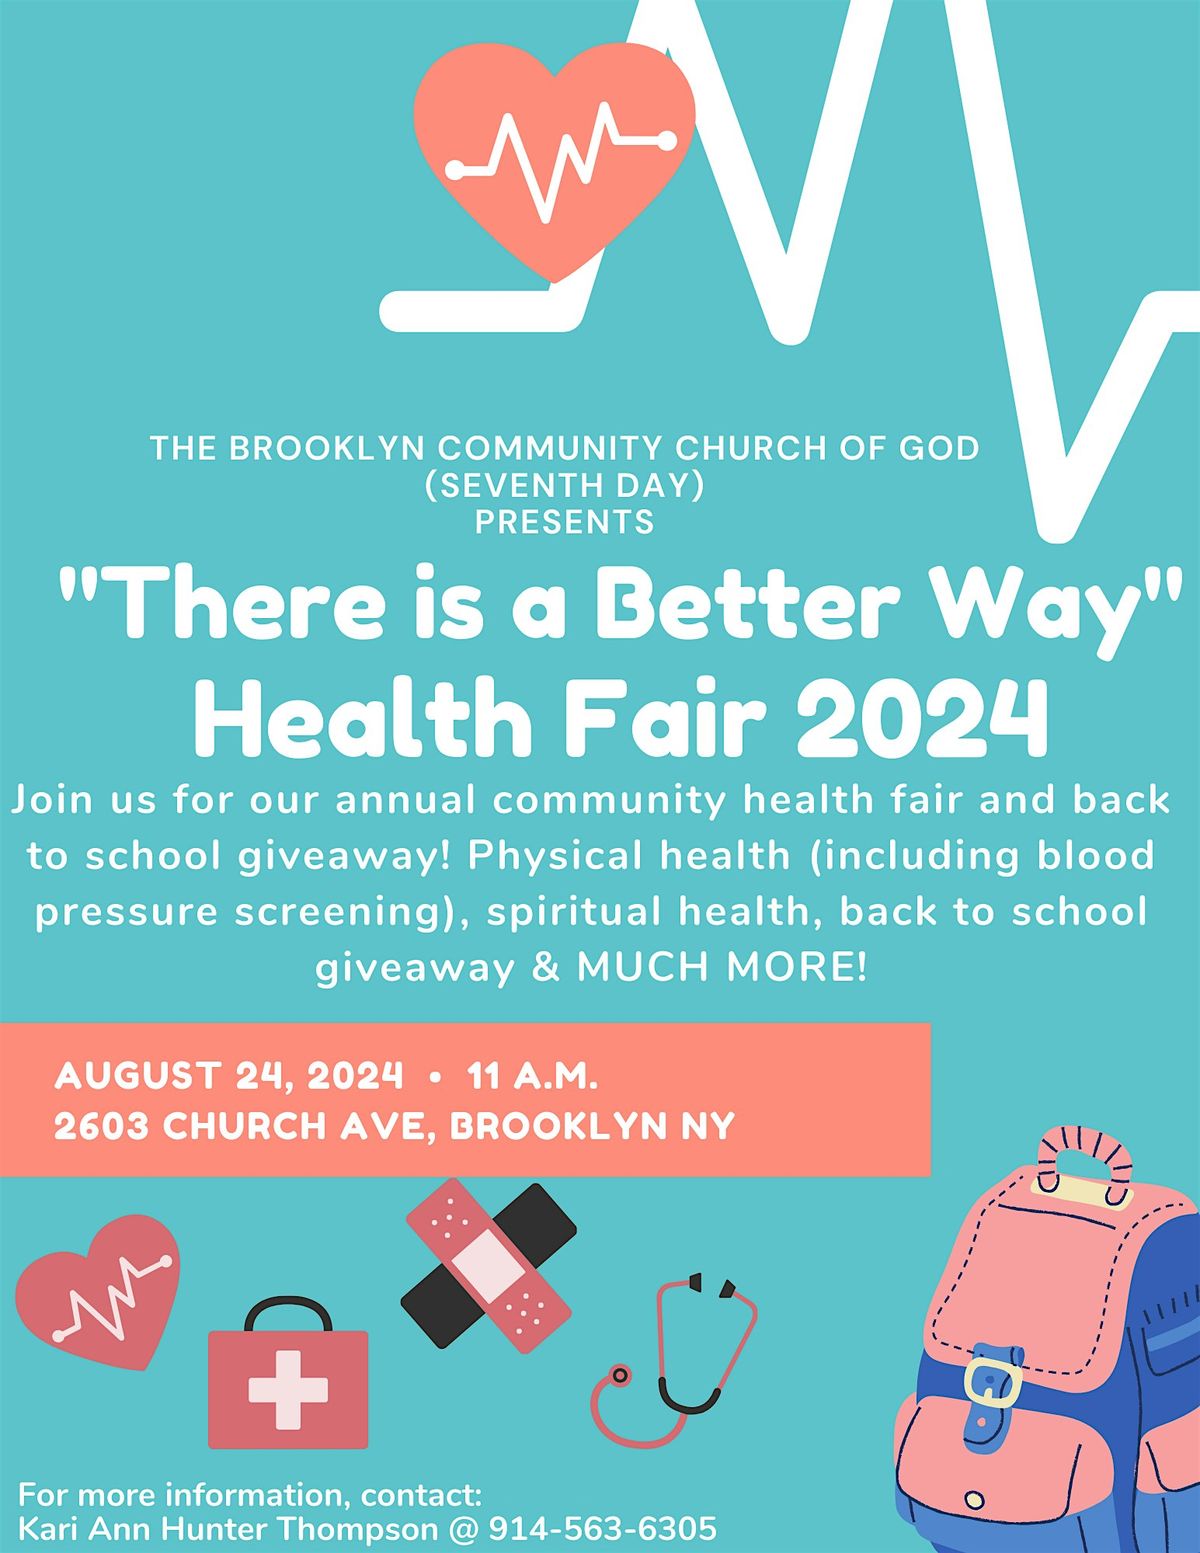 "There is a Better Way" Health Fair 2024